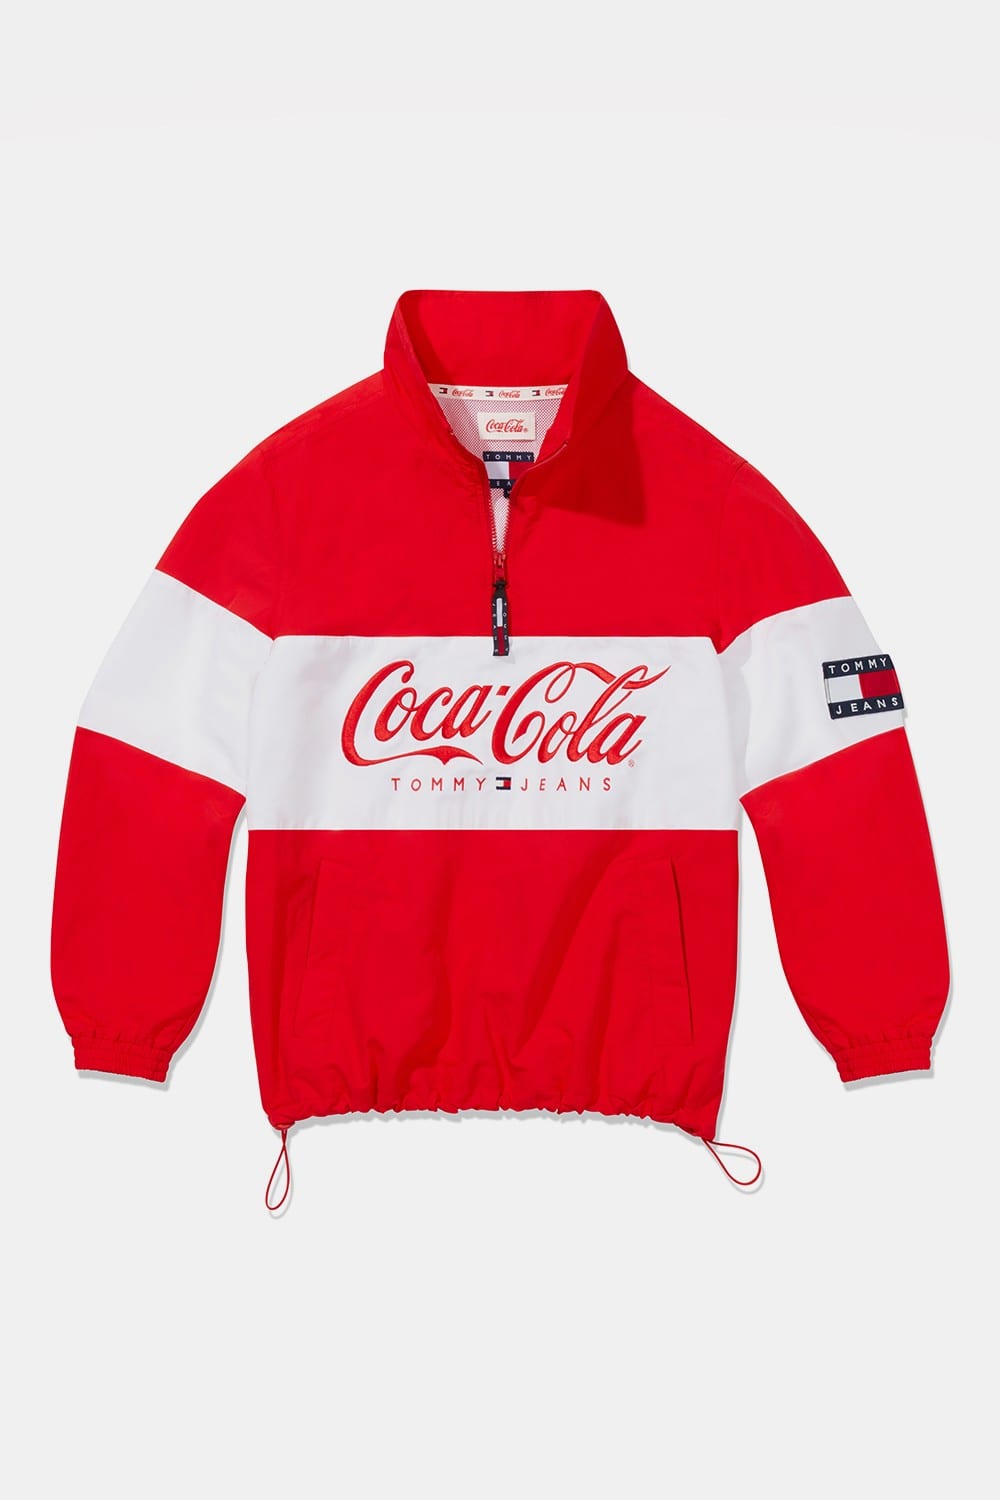 coca cola x tommy jeans